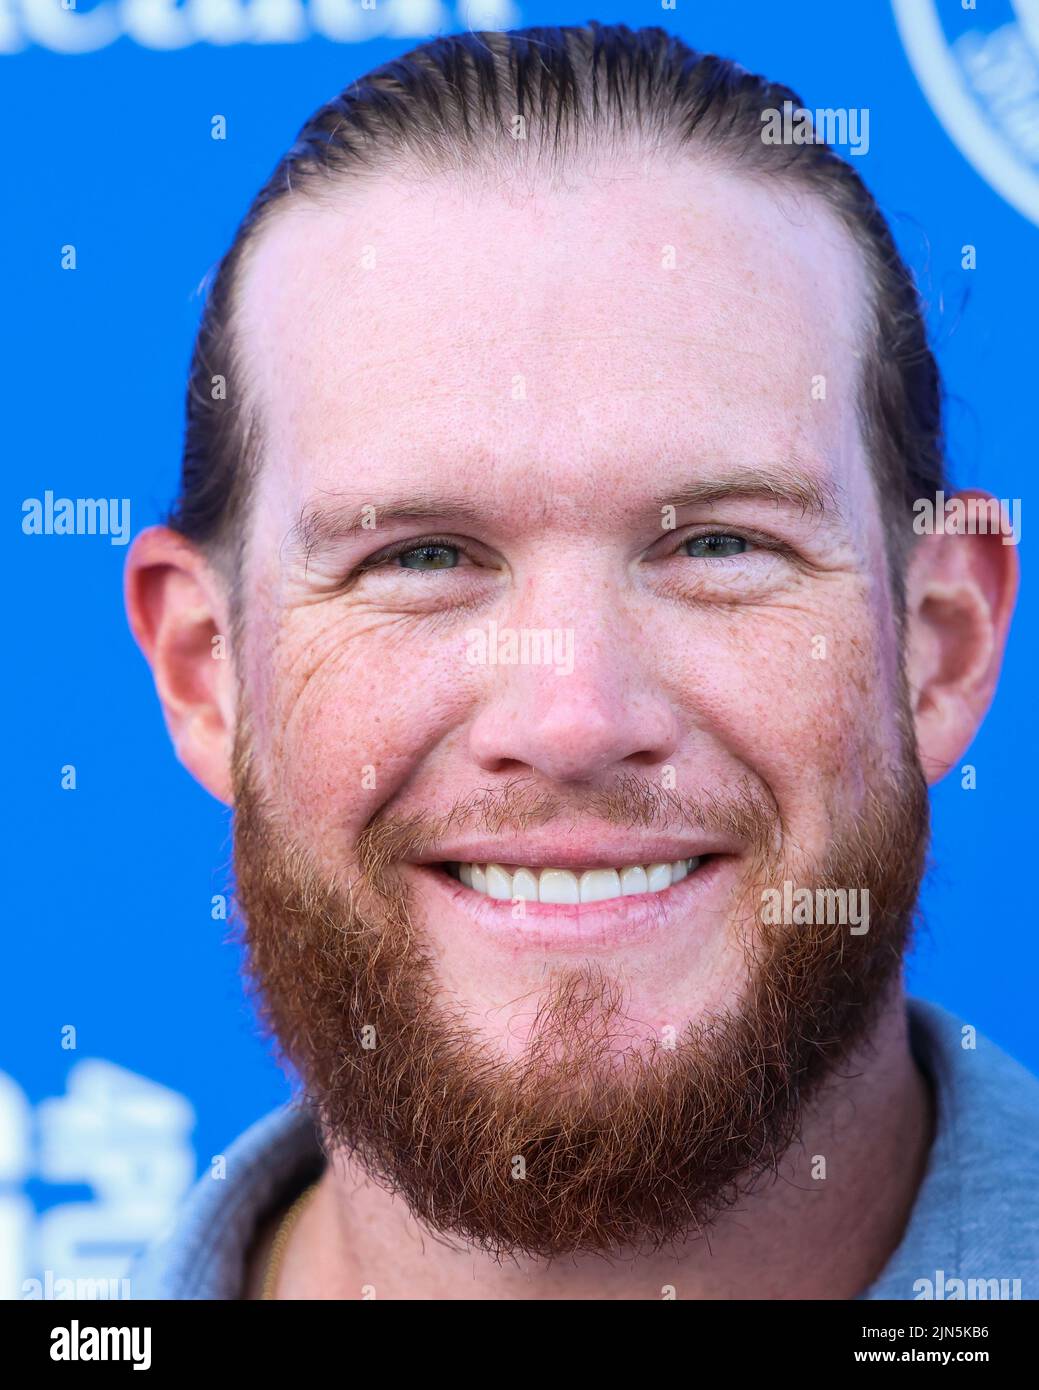 ELYSIAN PARK, LOS ANGELES, CALIFORNIA, USA - AUGUST 08: American professional baseball pitcher for the Los Angeles Dodgers of Major League Baseball Craig Kimbrel arrives at Kershaw's Challenge Ping Pong 4 Purpose 2022 held at Dodger Stadium on August 8, 2022 in Elysian Park, Los Angeles, California, United States. (Photo by Xavier Collin/Image Press Agency) Stock Photo